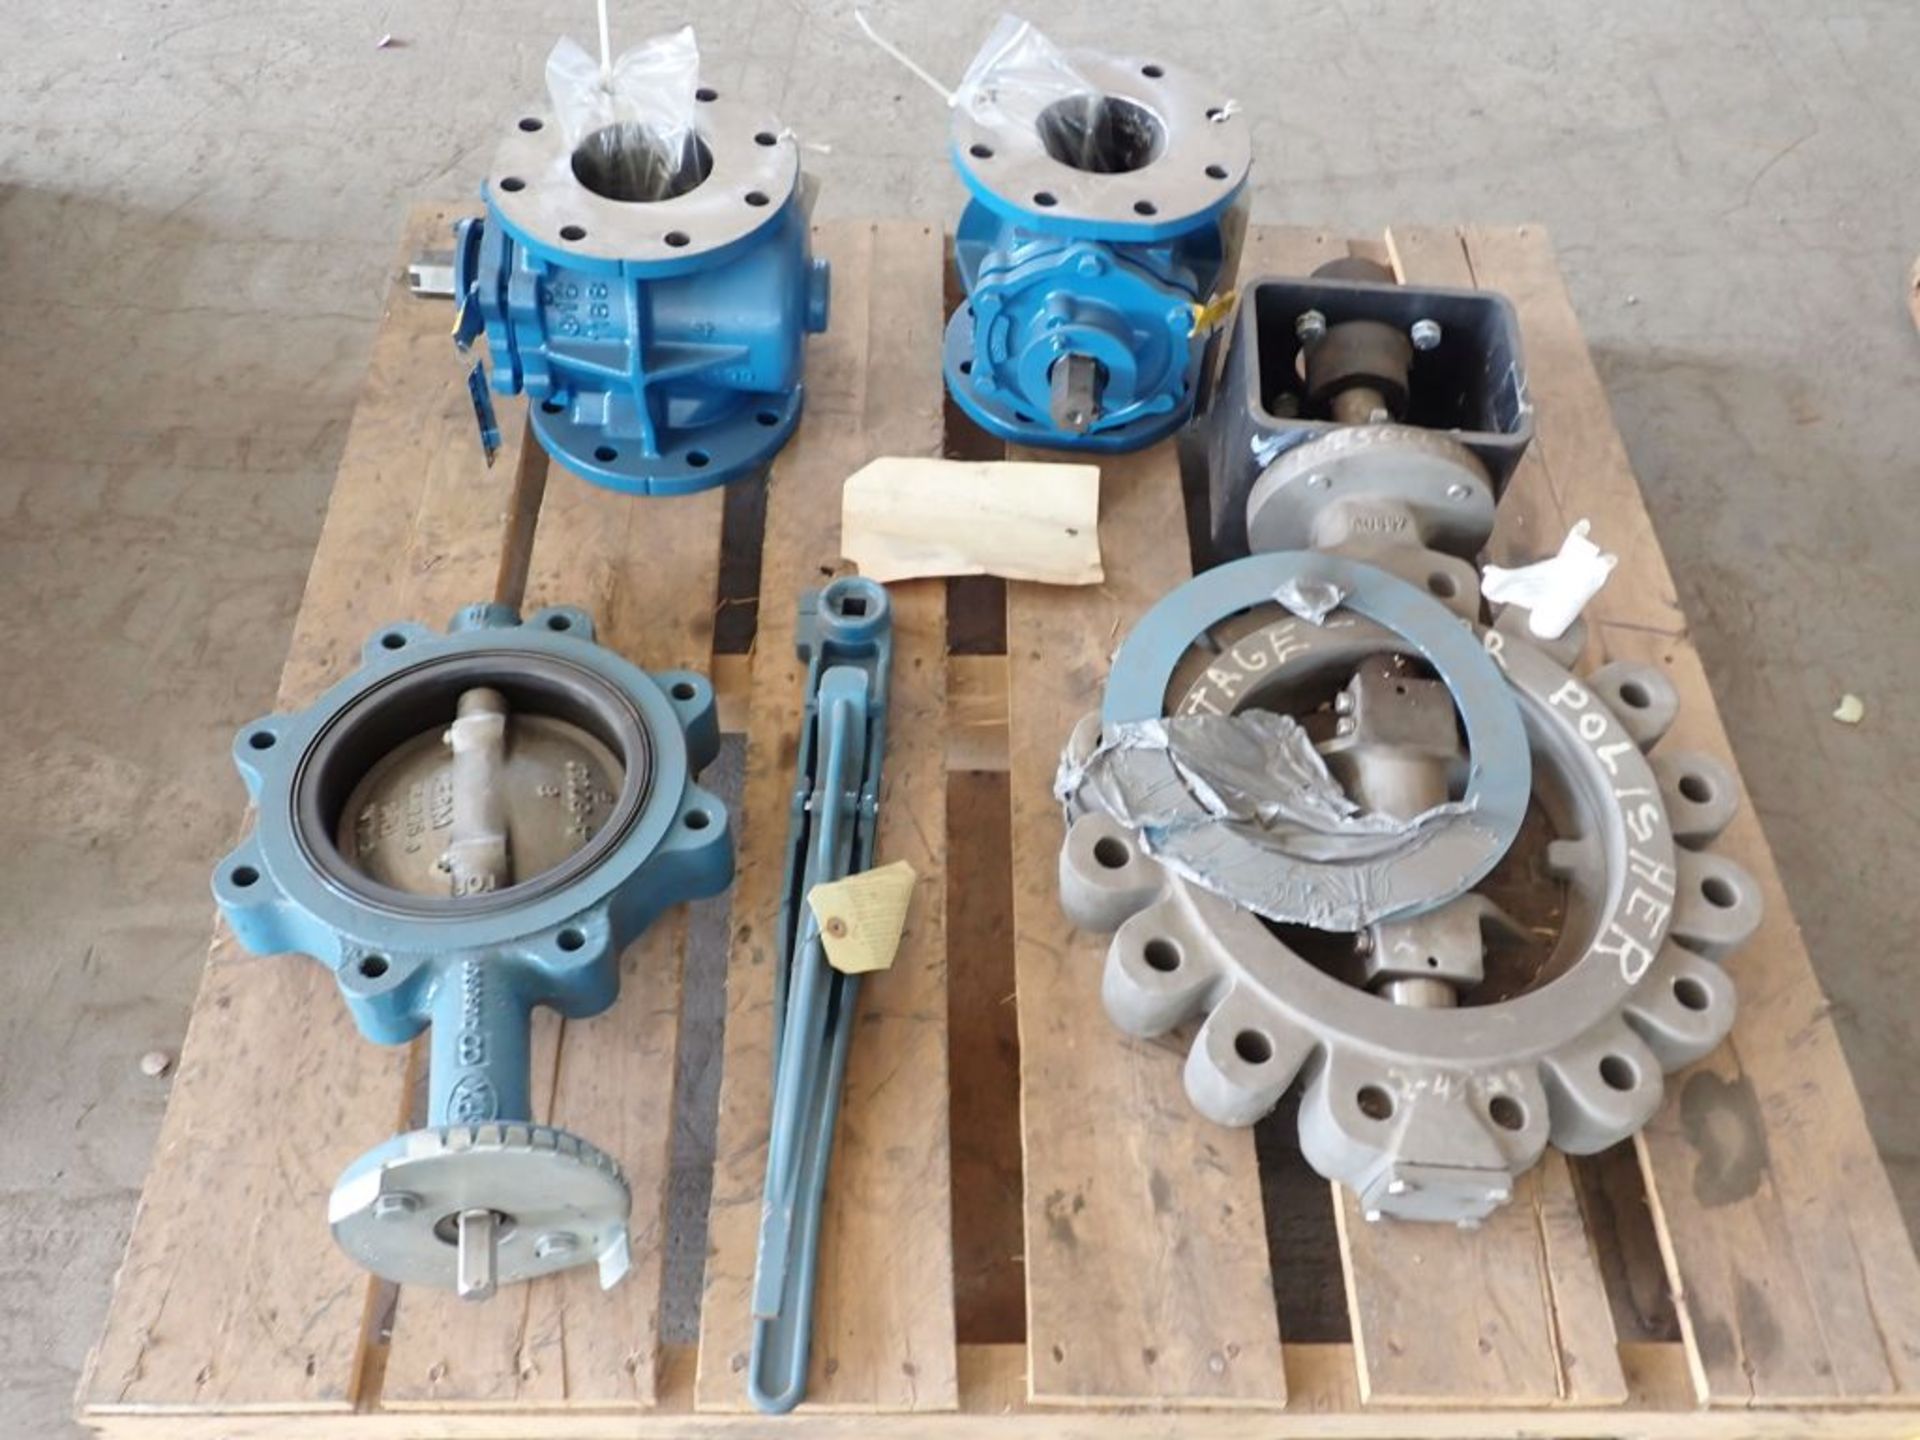 Lot of (4) Valves and (1) Actuator | (1) Pike Butterfly Valve, Part No. 13611, Size: 10", Disc: